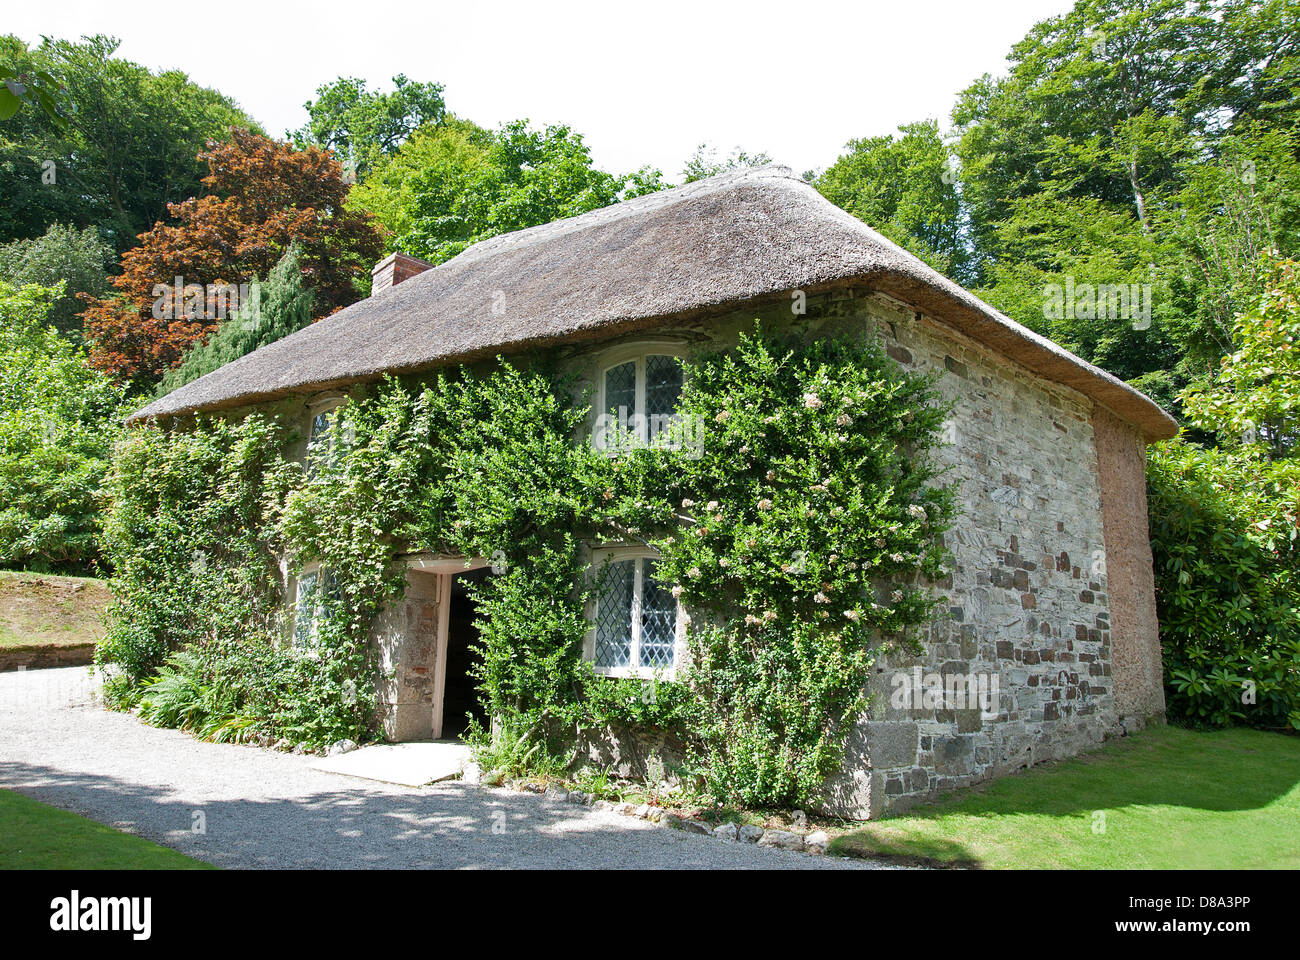 a thatched roof cottage in a woodland setting, england, uk Stock Photo